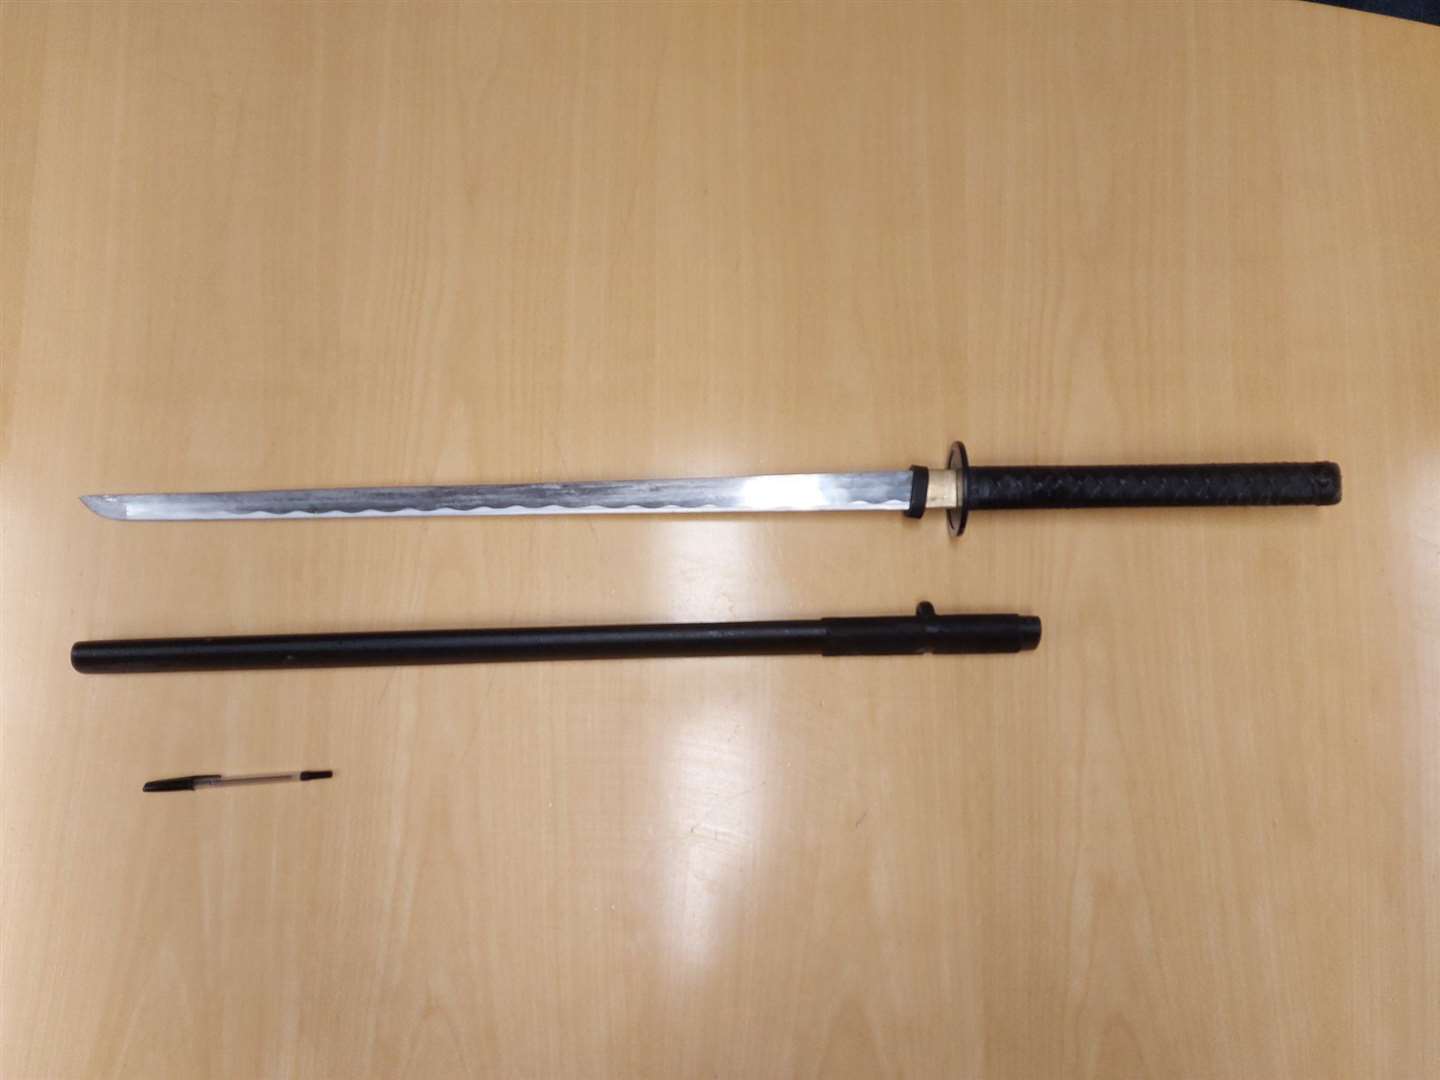 Police seized this sword after stopping a car in Tenterden, with a pen for scale. Photo: Kent Police